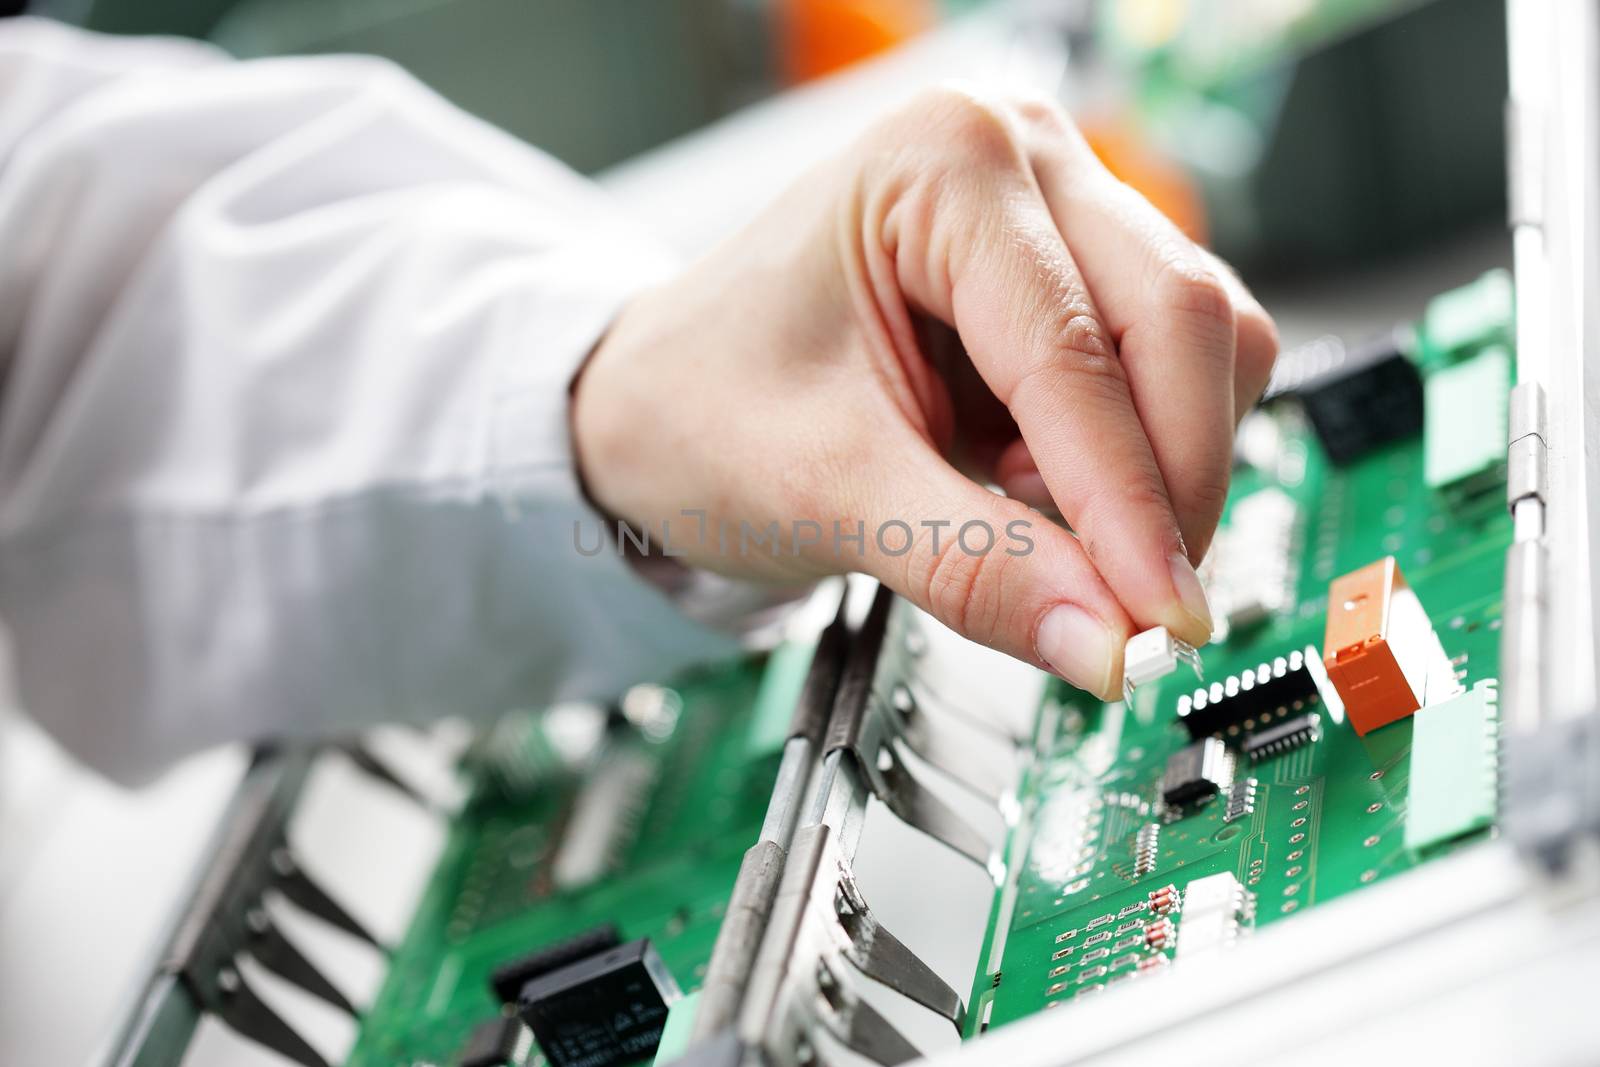 Technician assembling electonic components at his worktable.